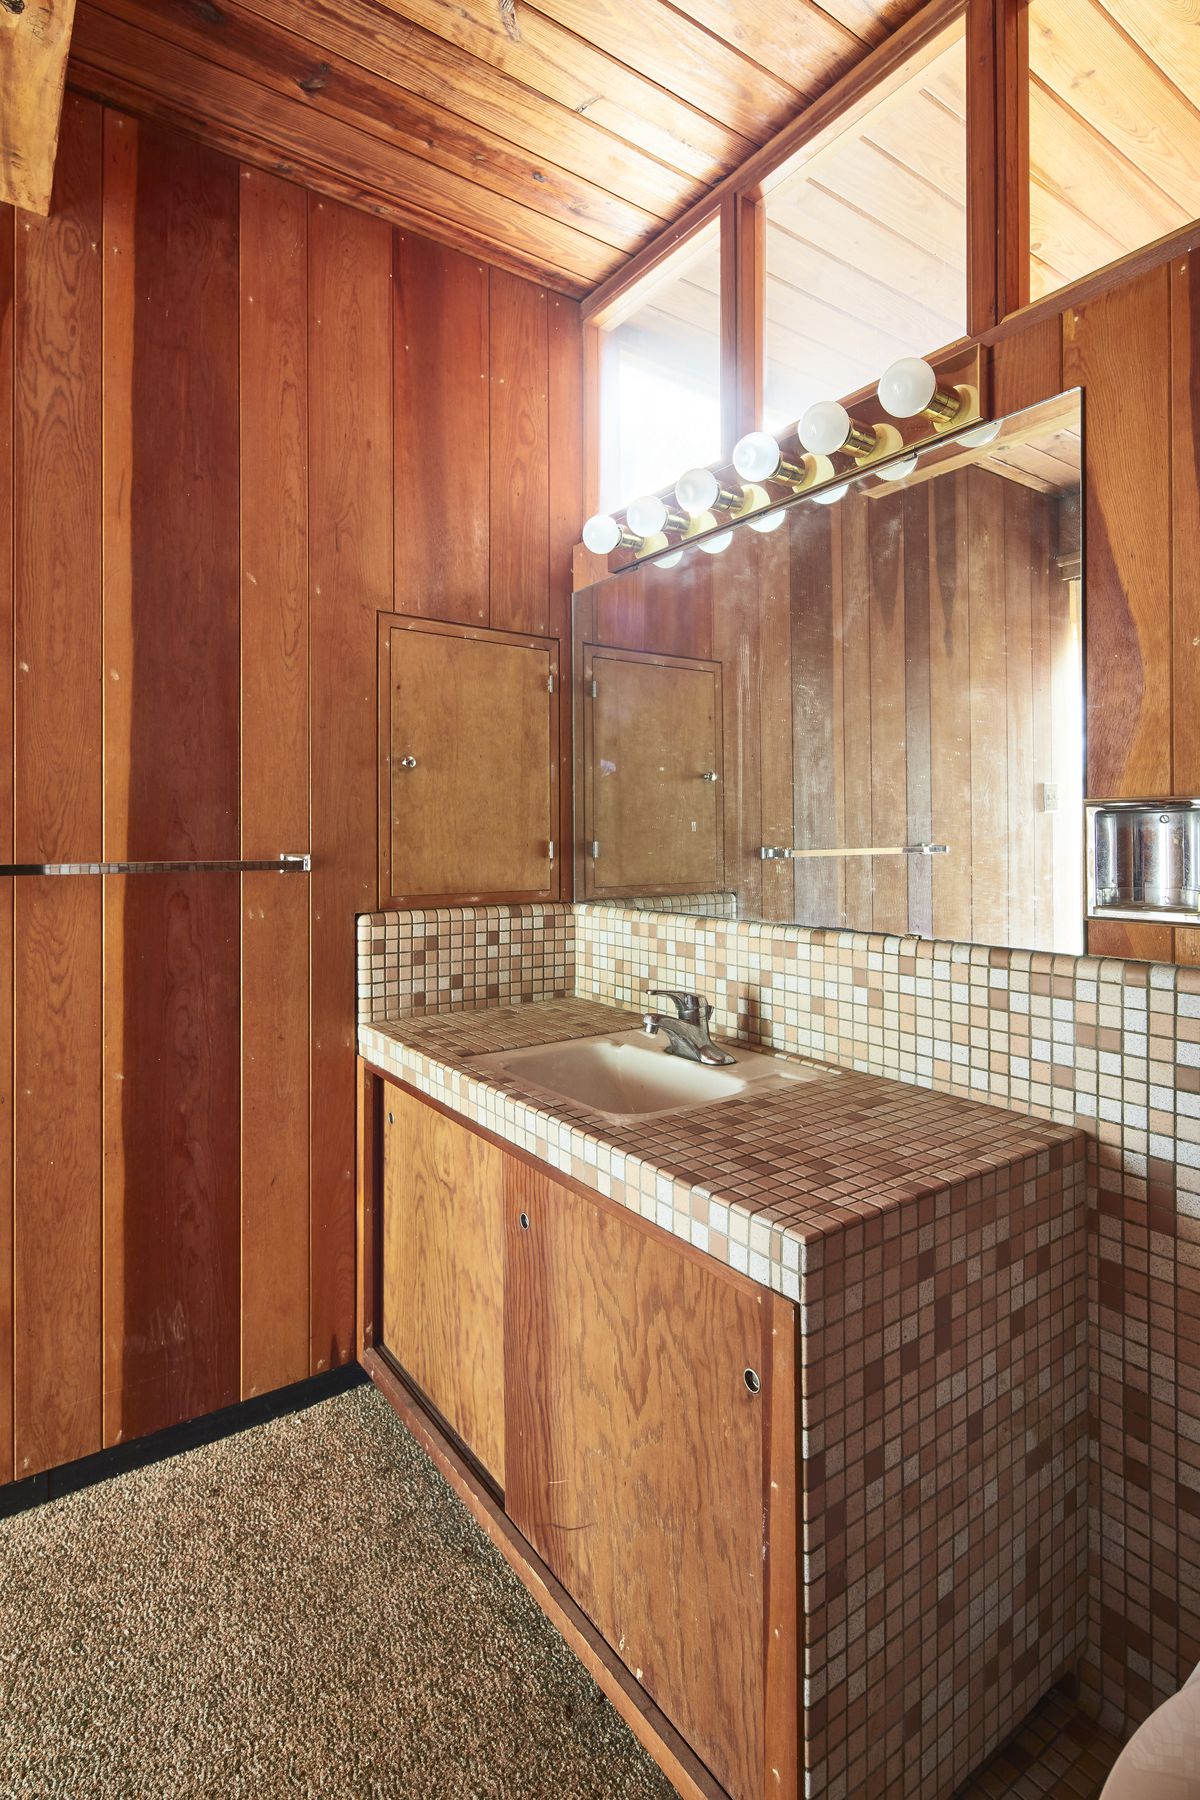 A bathroom with warm wood walls and cabinets, and small tiles.